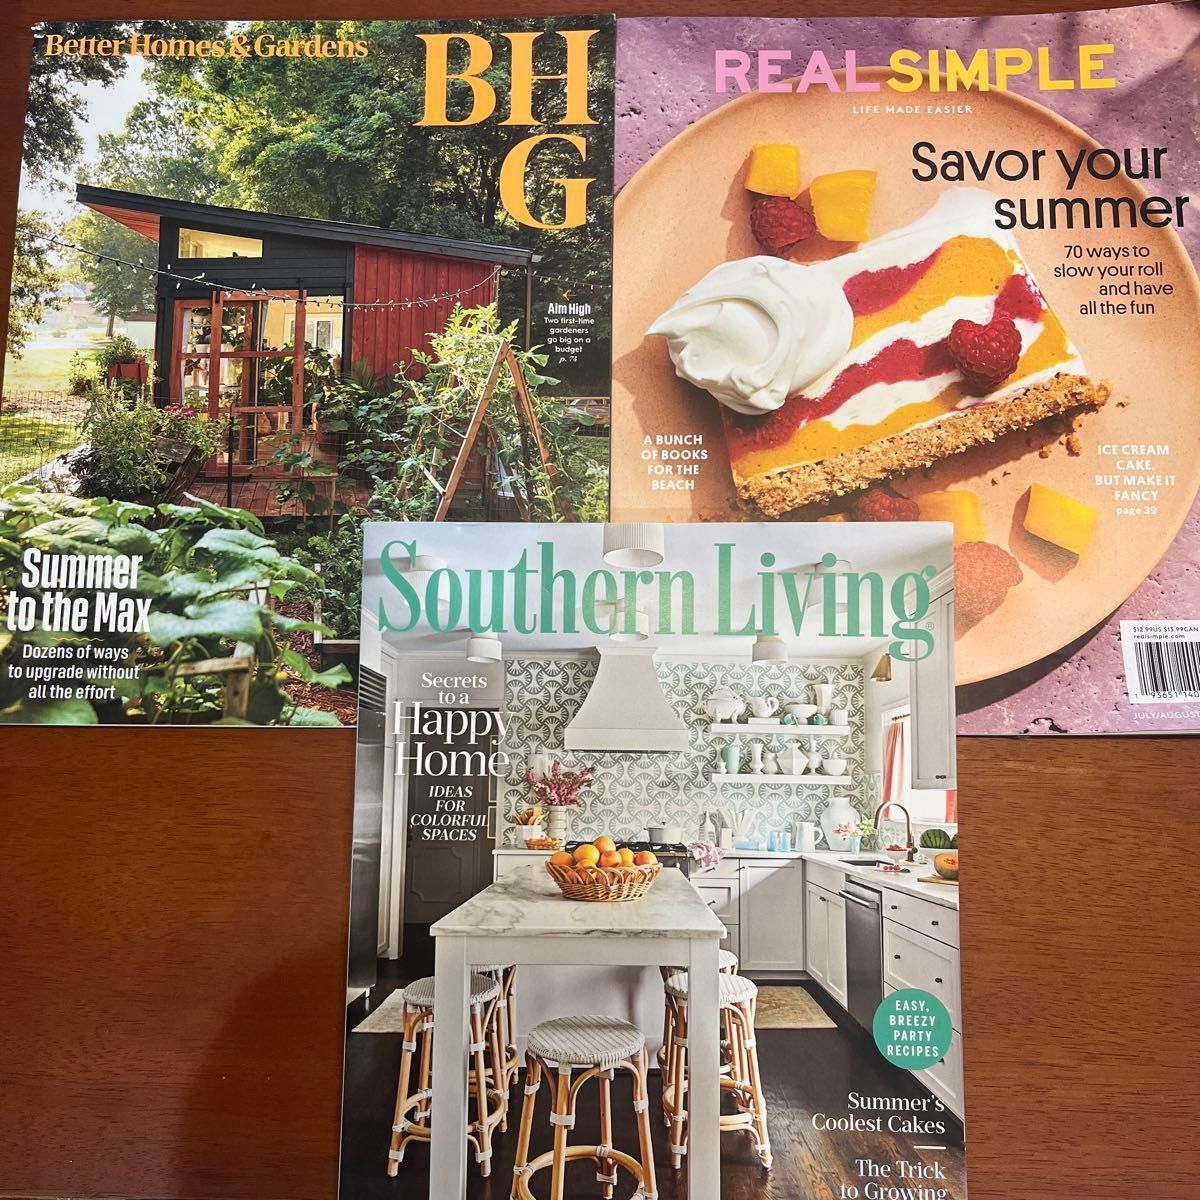 Southern Living、Better Homes&Gardens、Real Simple3冊セット